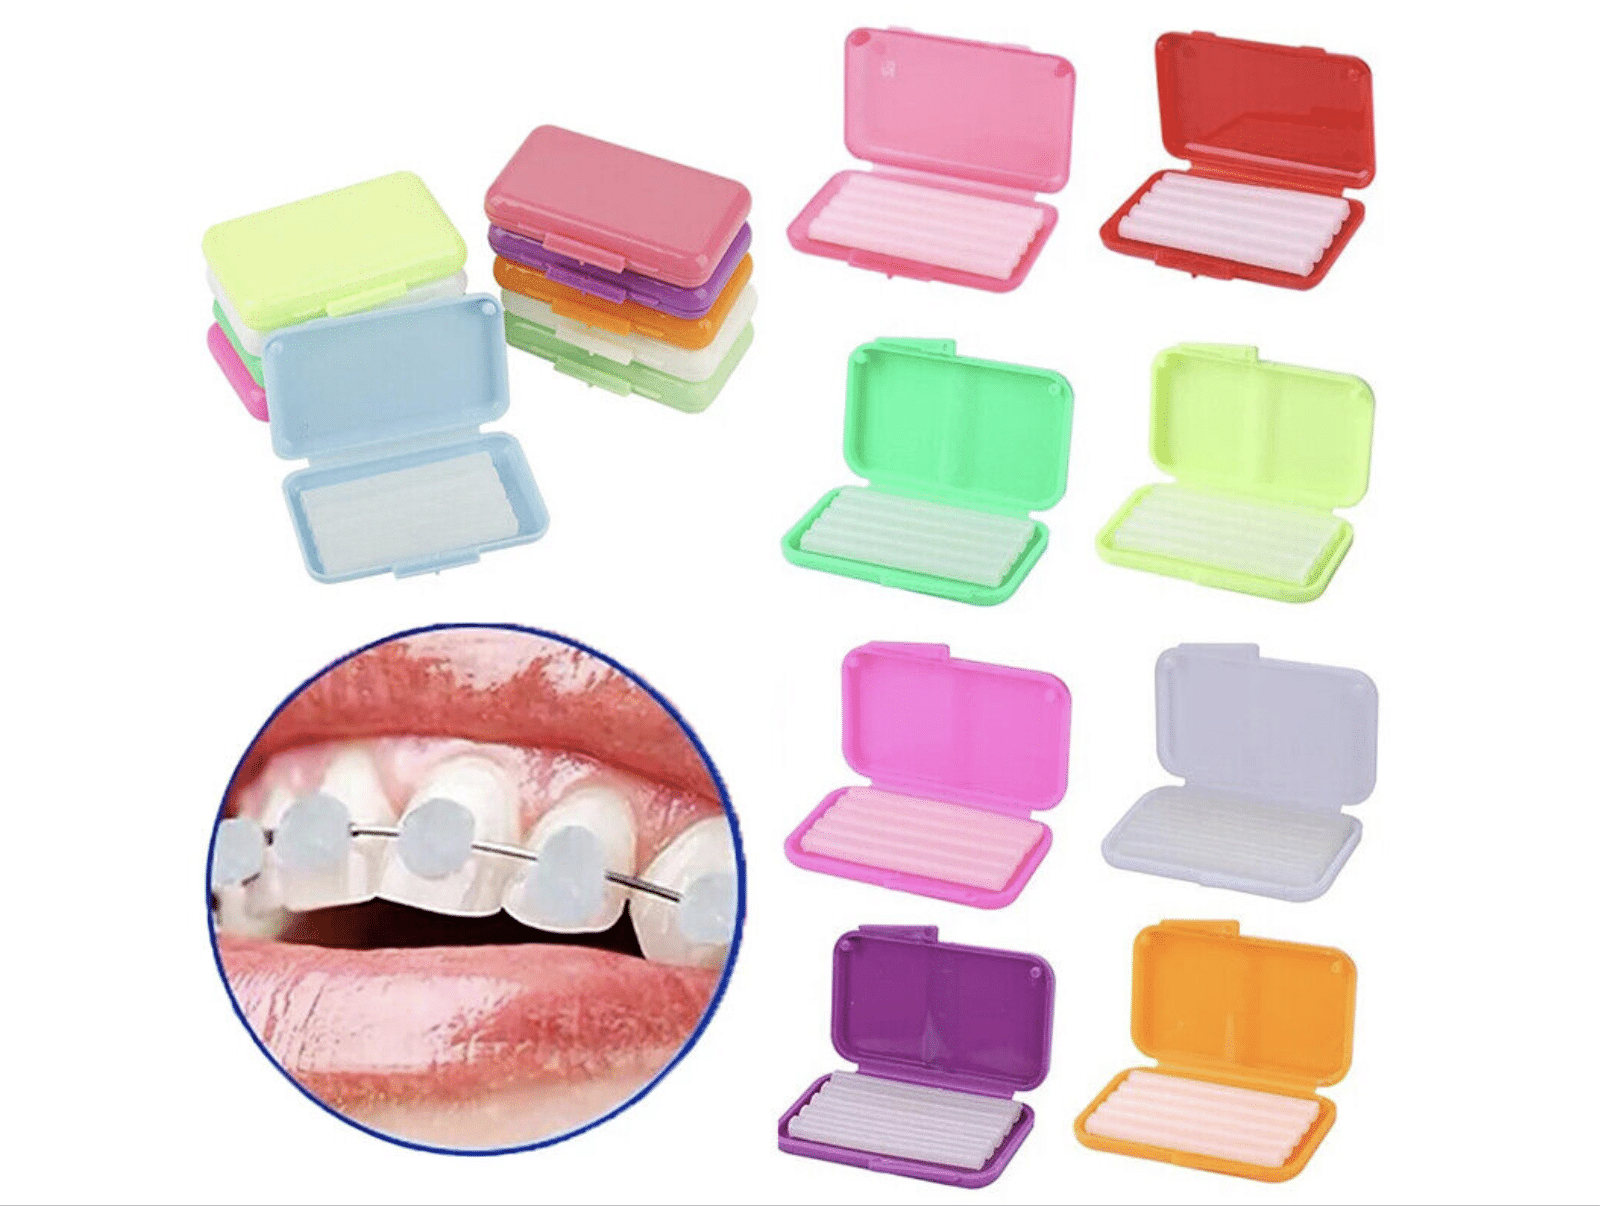 Orthodontic wax pack of 1 (£ 2.00)